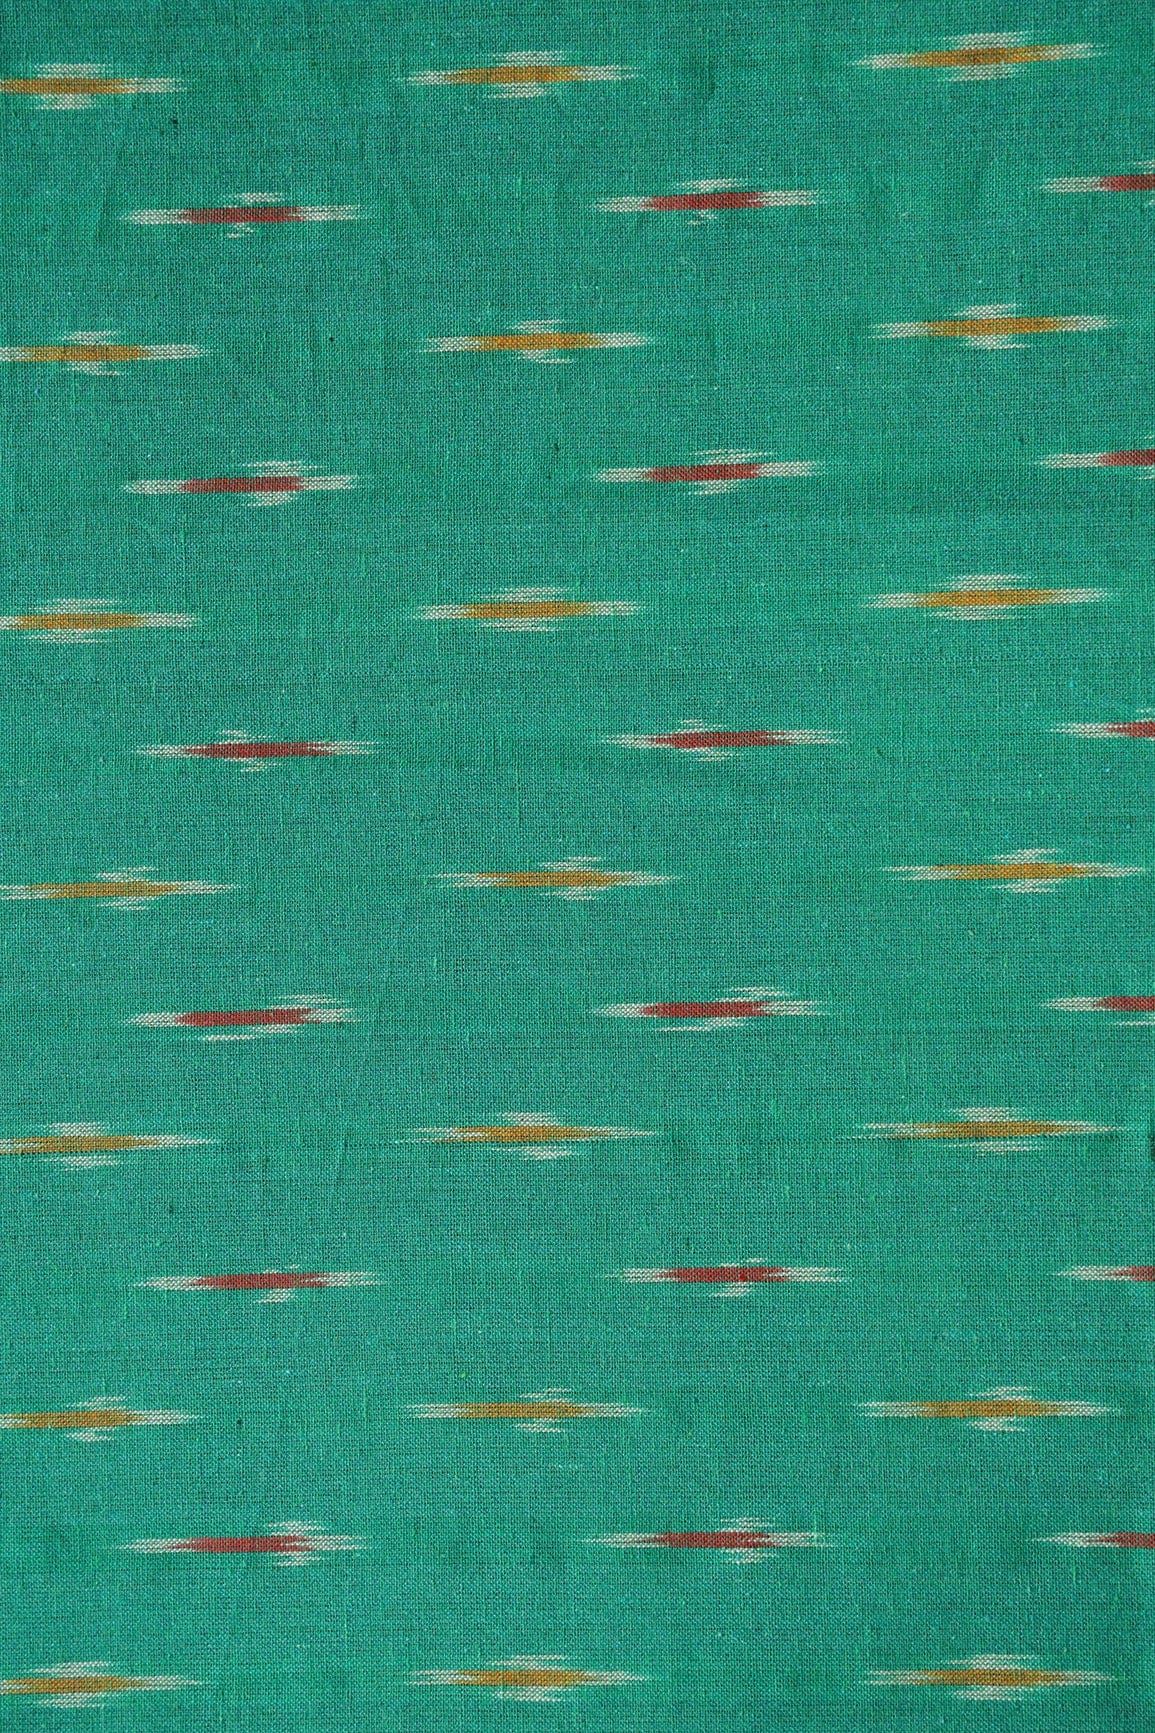 doeraa Hand Woven Carribbean Green And Red Geometric Pattern Handwoven Ikat Organic Cotton Fabric